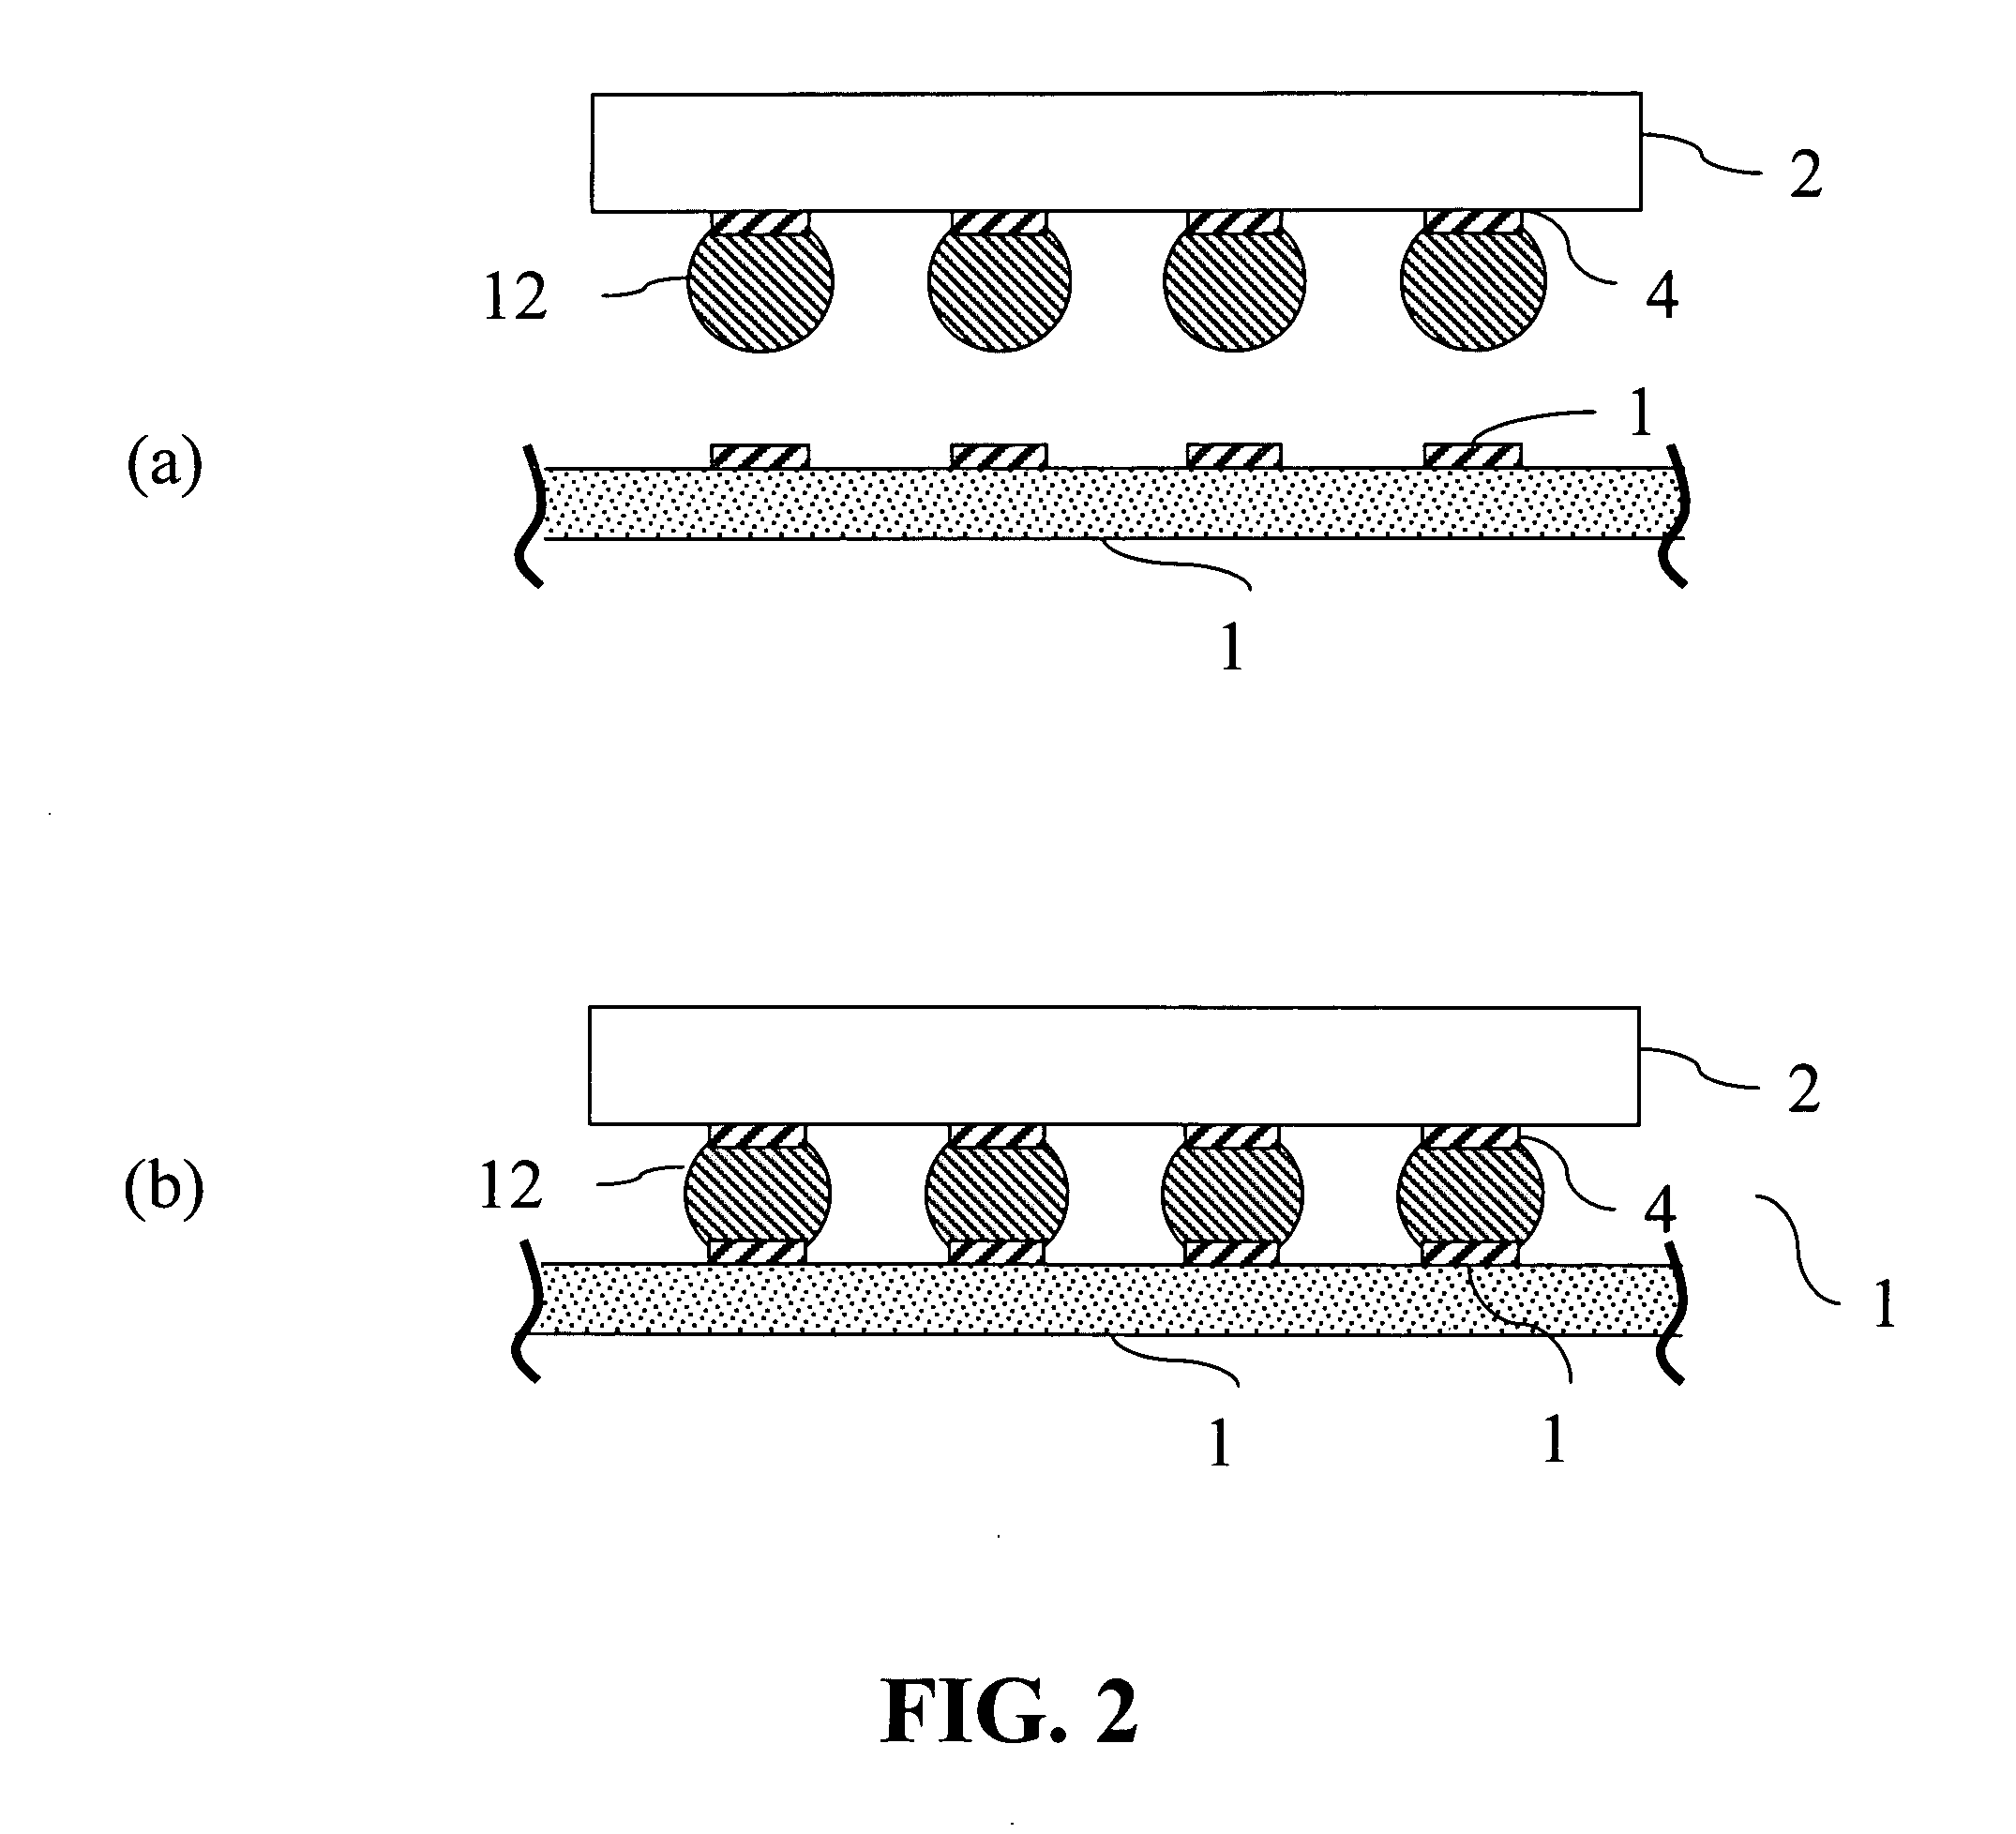 Methods of forming solder areas on electronic components and electronic components having solder areas